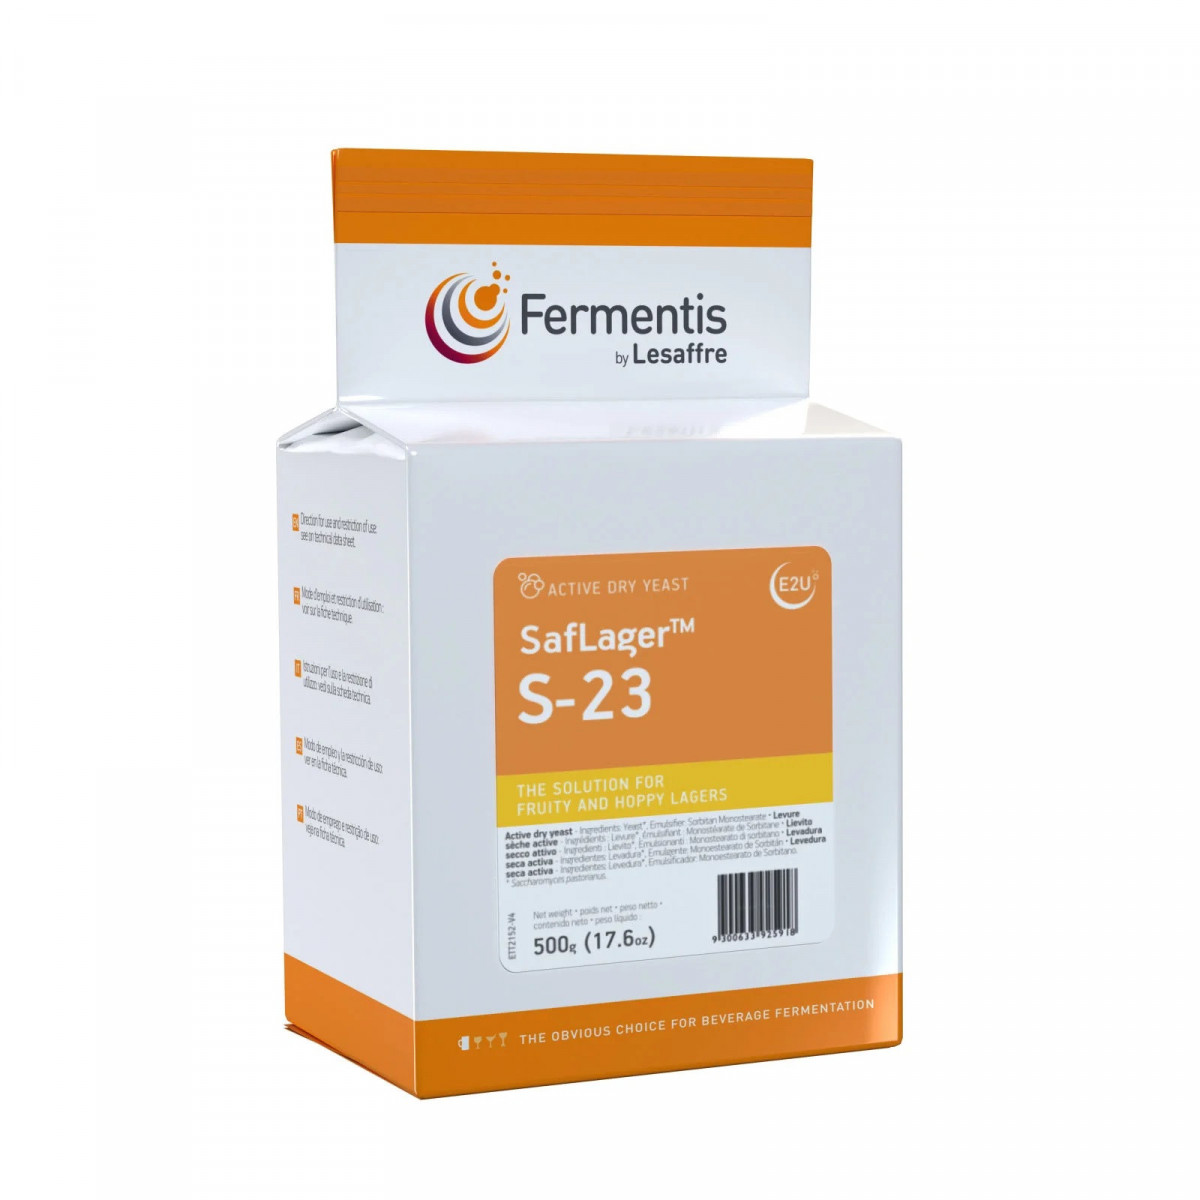 Fermentis dried brewing yeast SafLager S-23 500 g